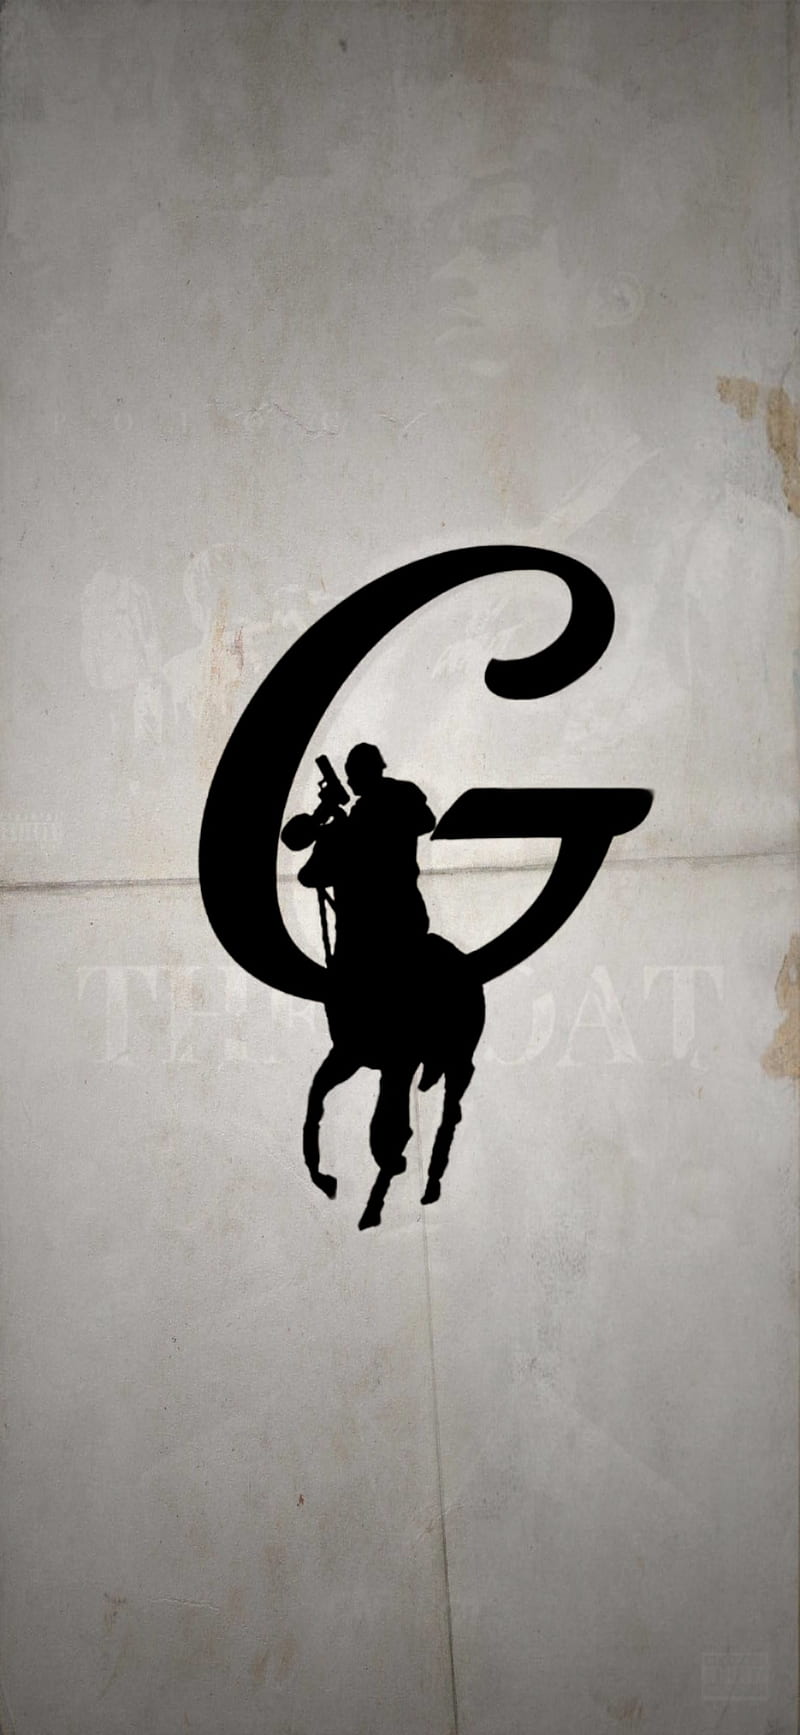 Polo G Wallpaper Discover more aesthetic, g cartoon, g iphone, goat, iphone  wallpaper.